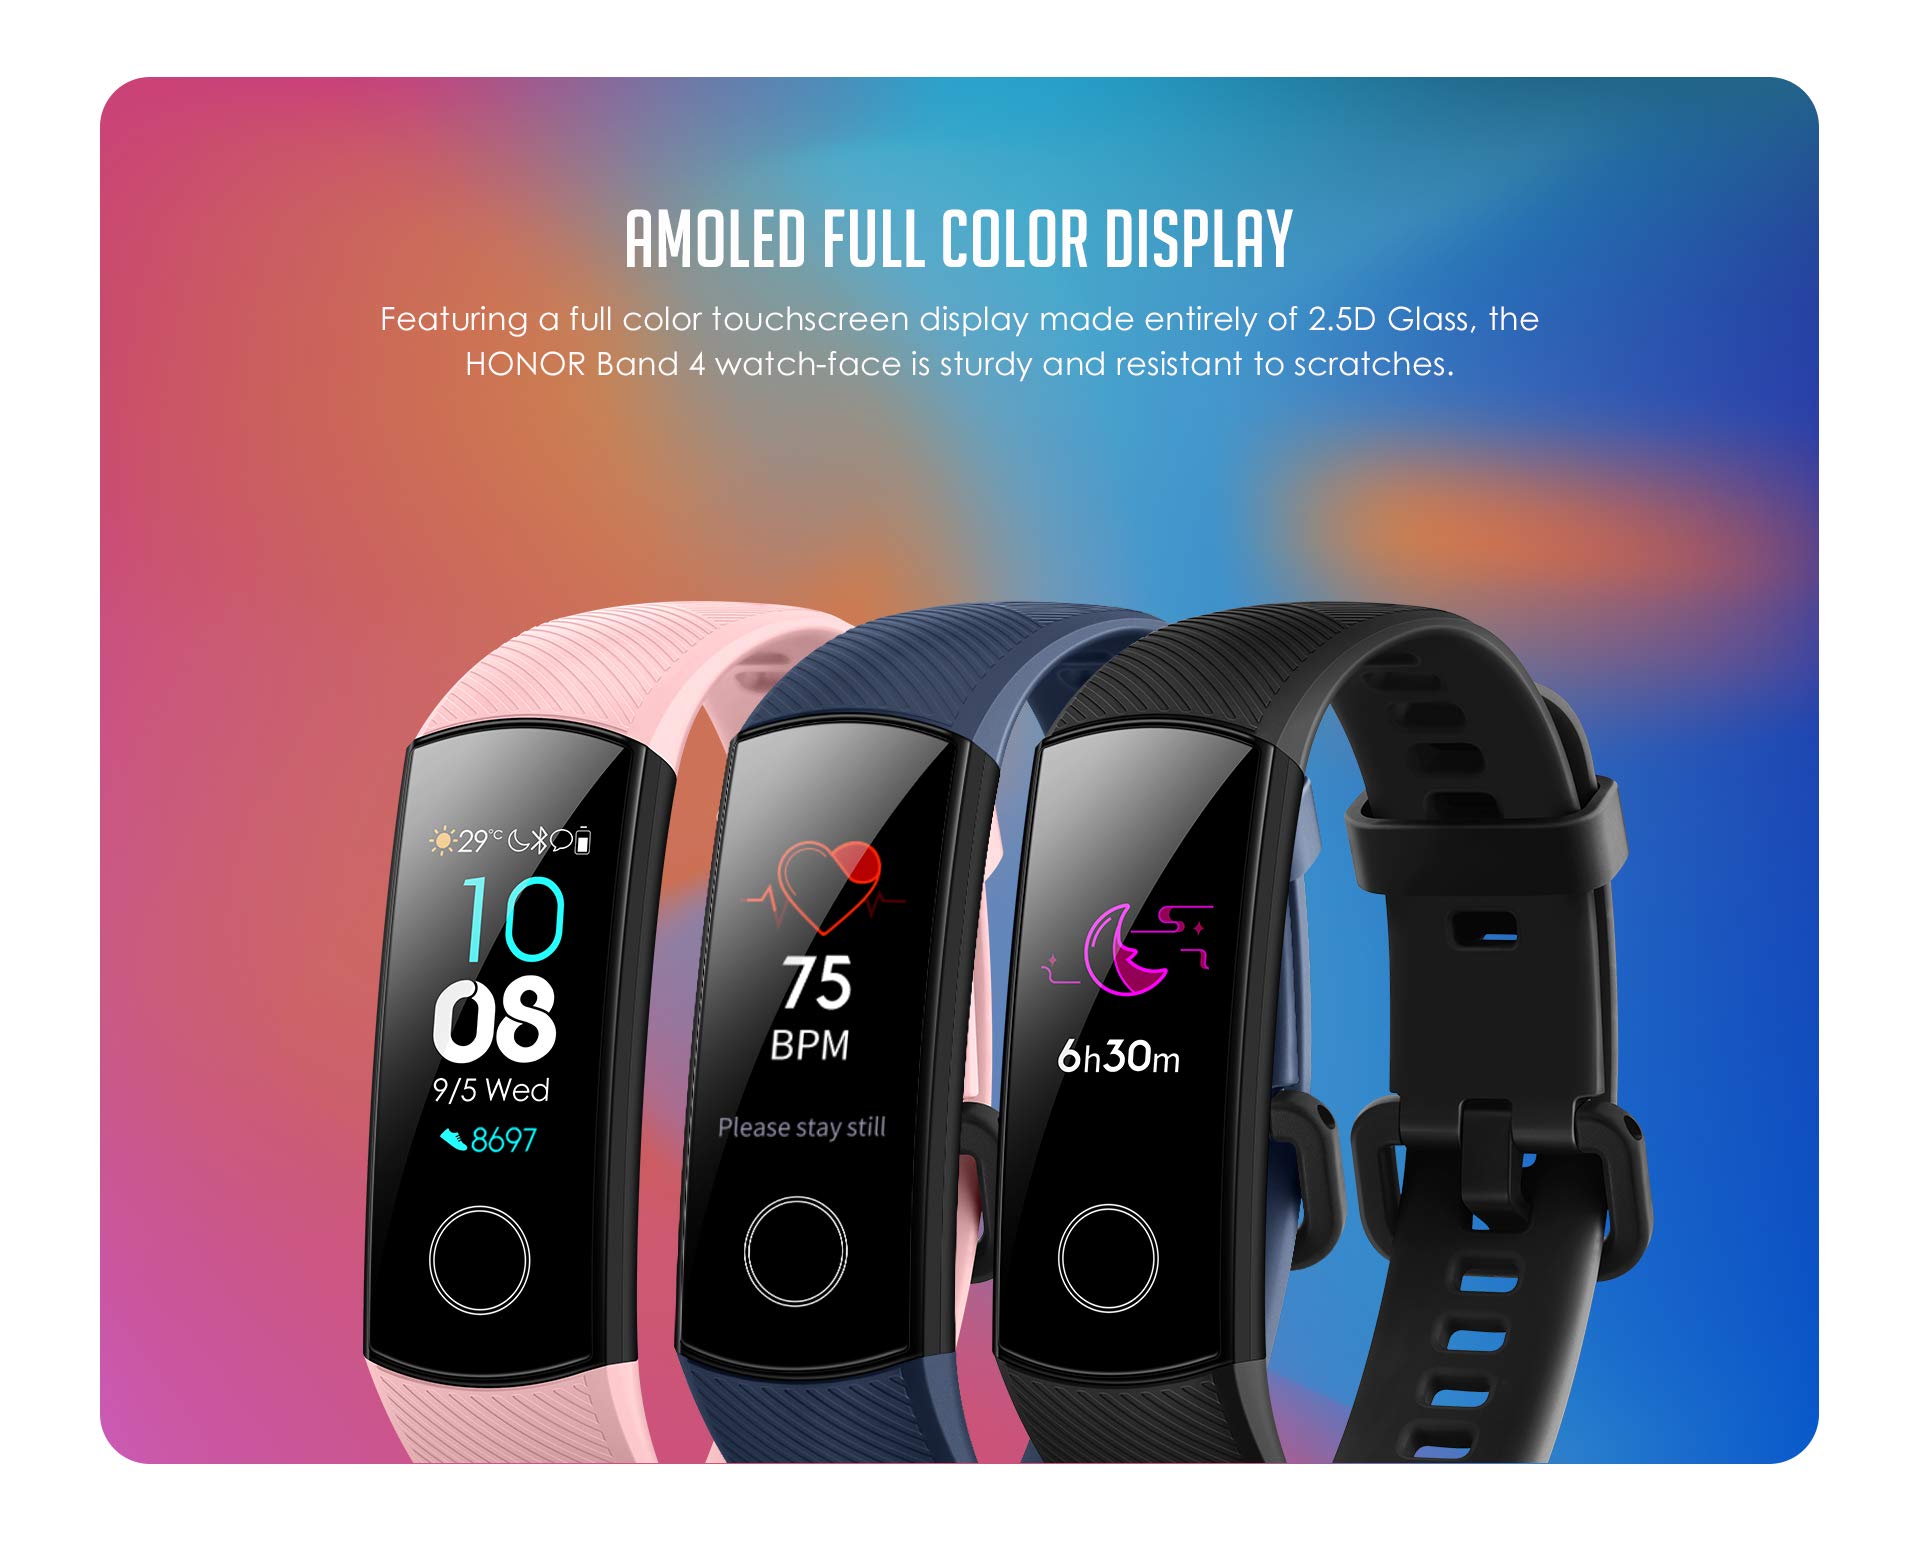 Honor Band 4 with AMOLED full color display